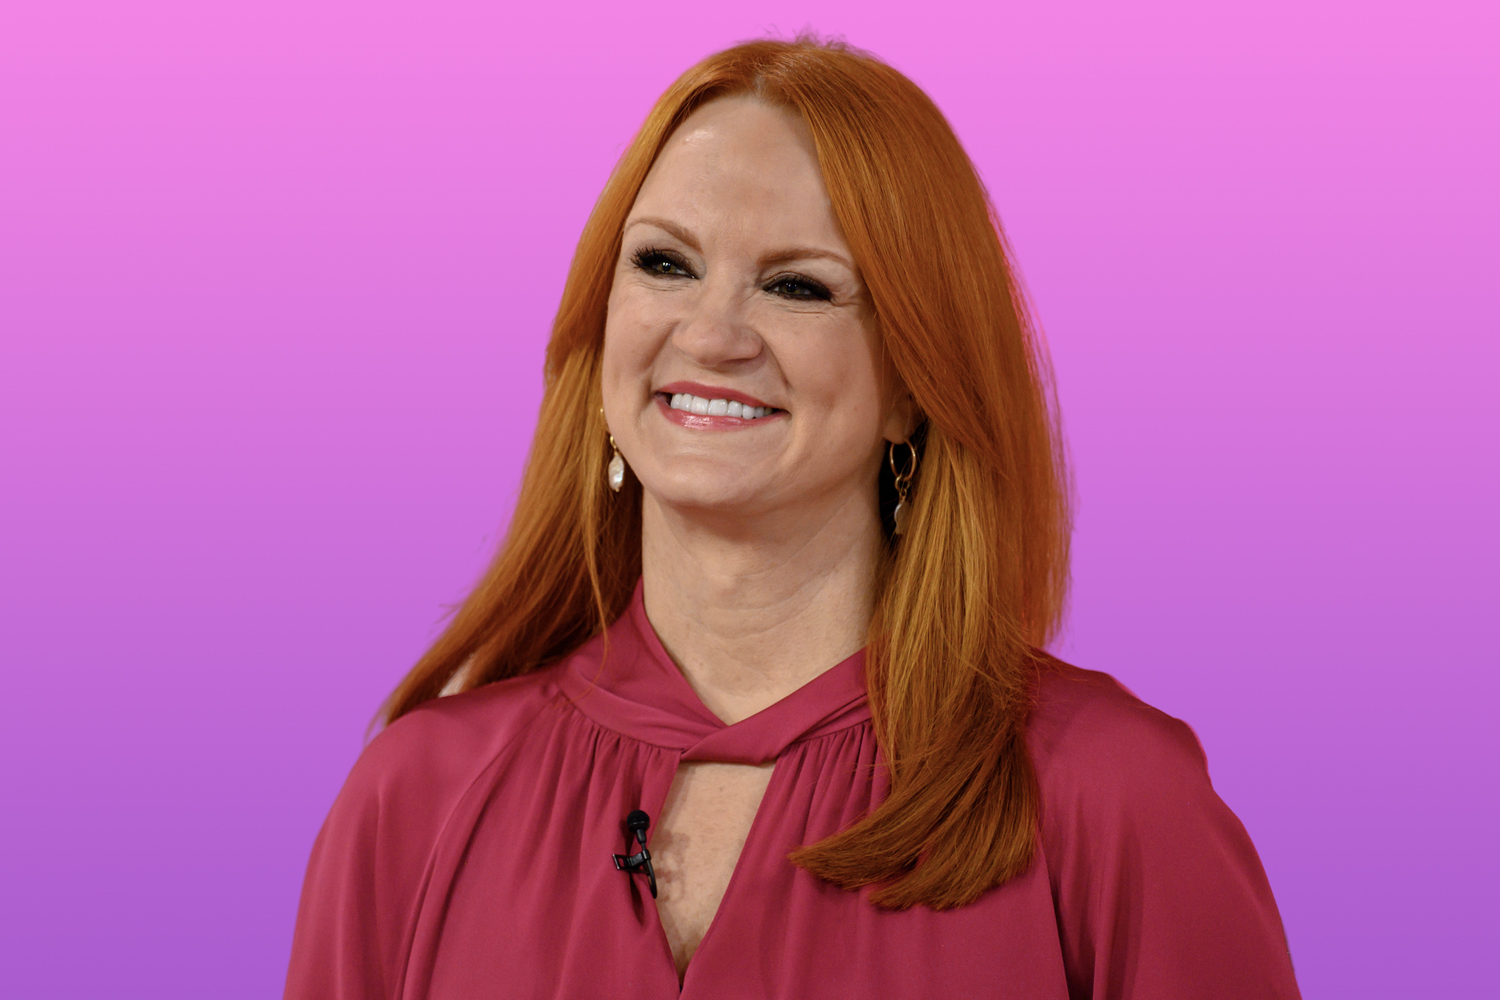 Ree Drummond smiling and wearing a magenta top